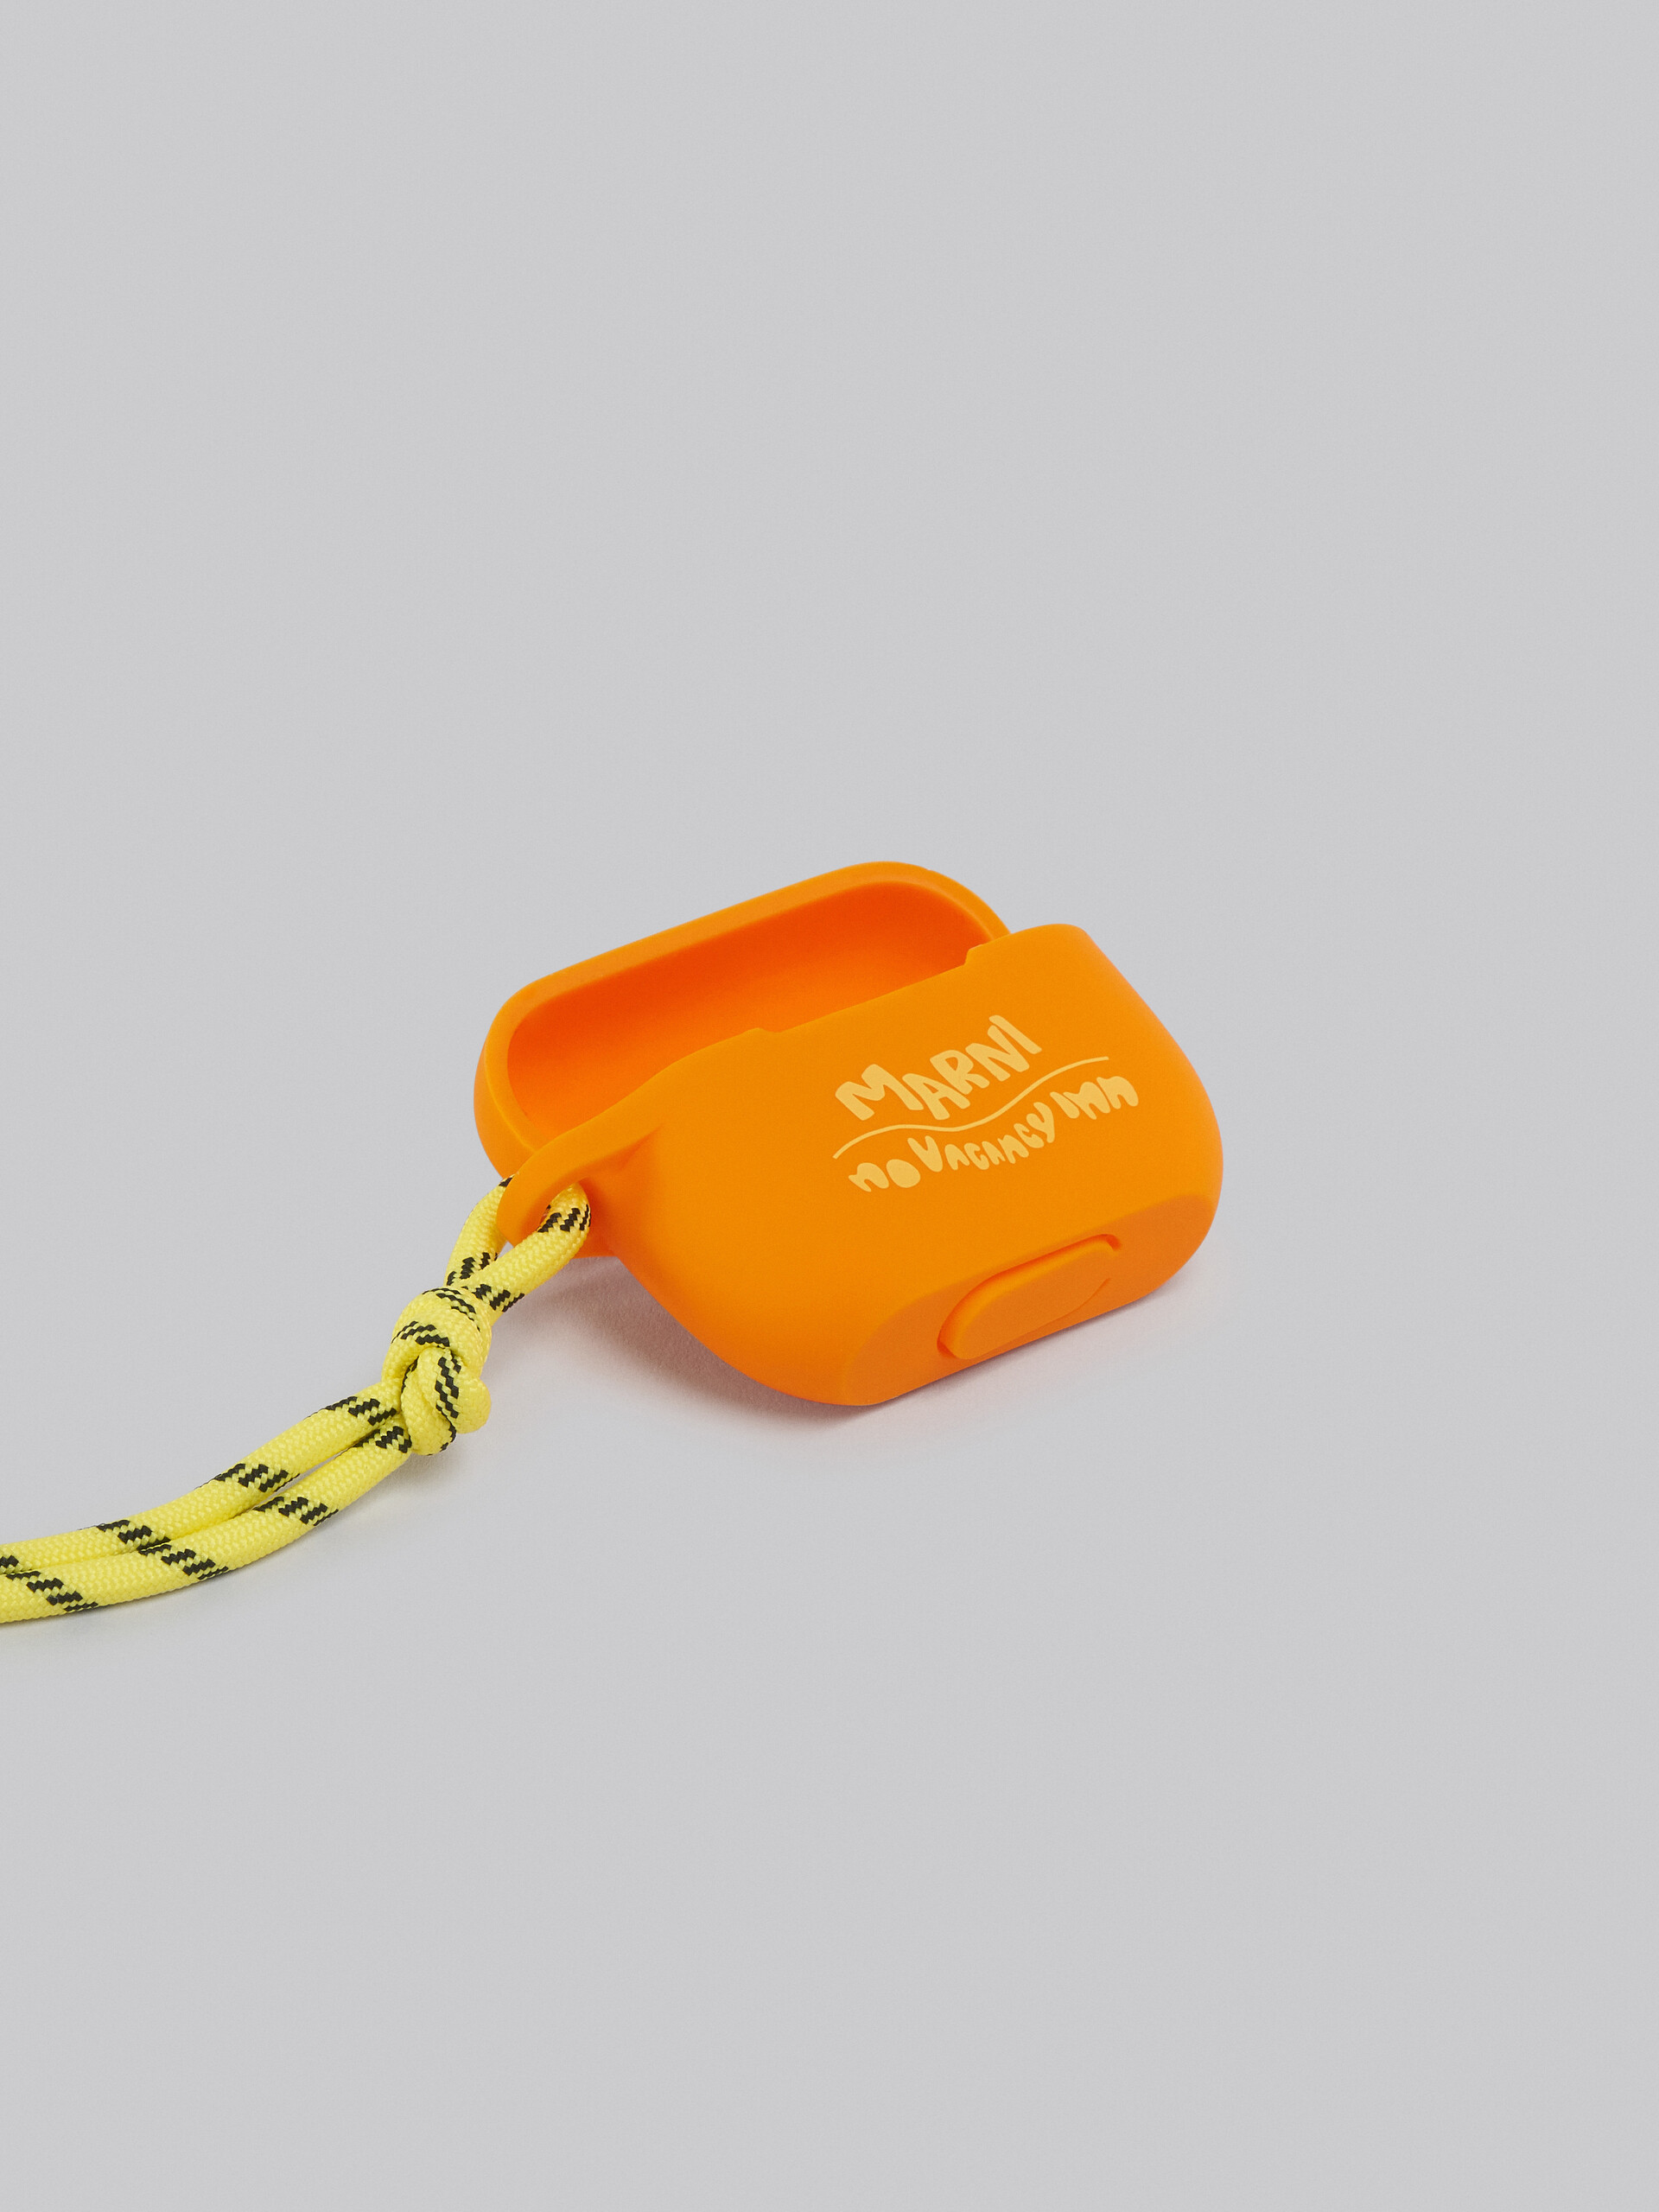 Marni x No Vacancy Inn - Orange and yellow Airpods case - Other accessories - Image 4